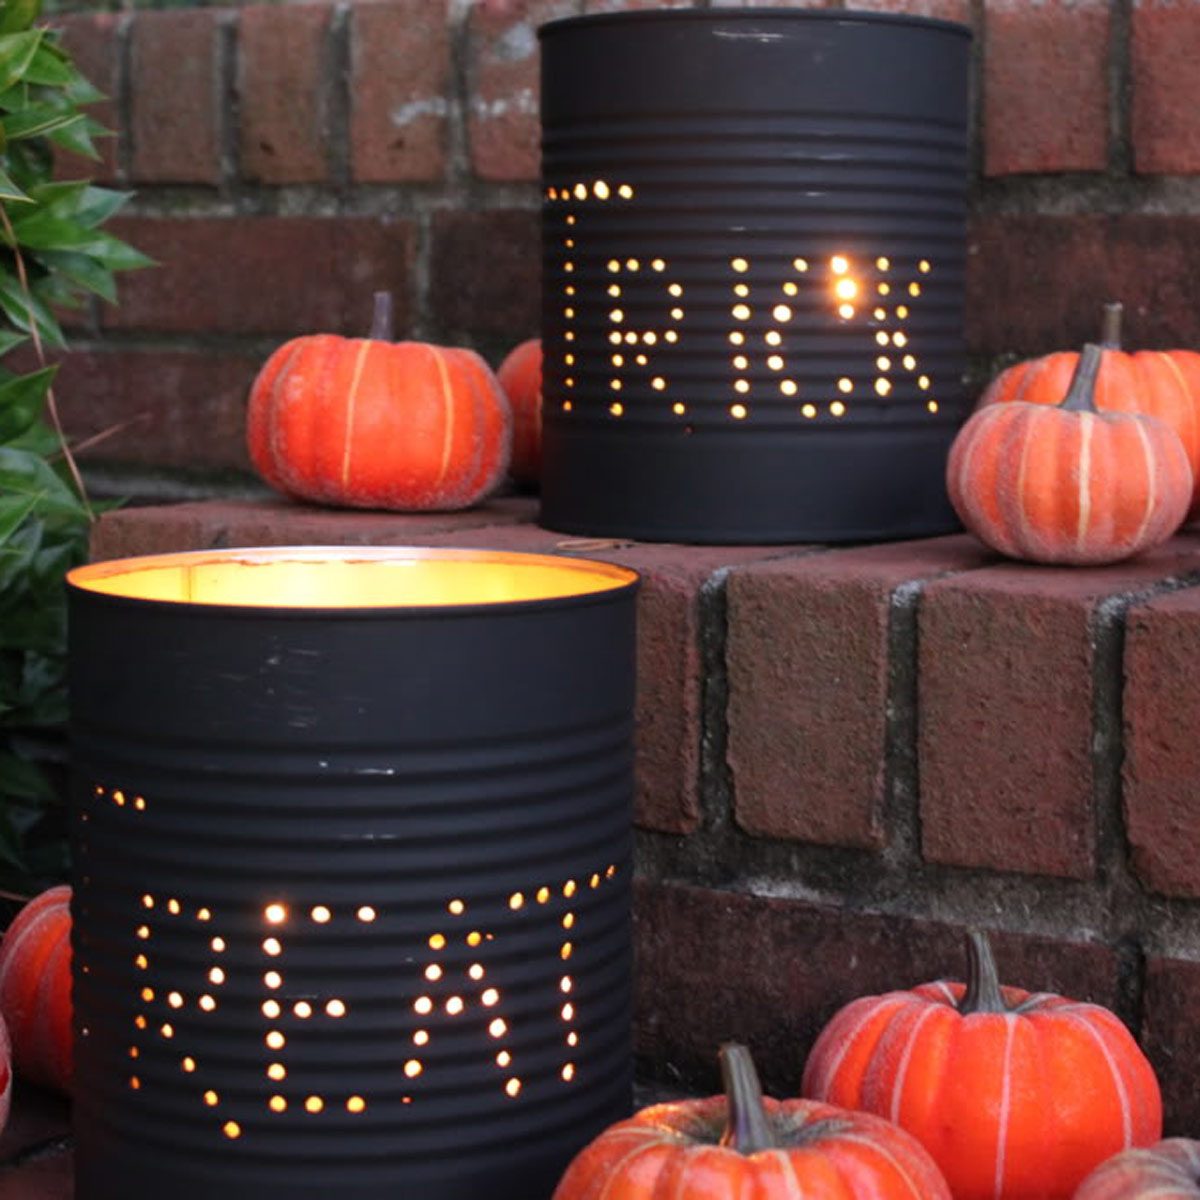 2022 Halloween Home and Décor Trends